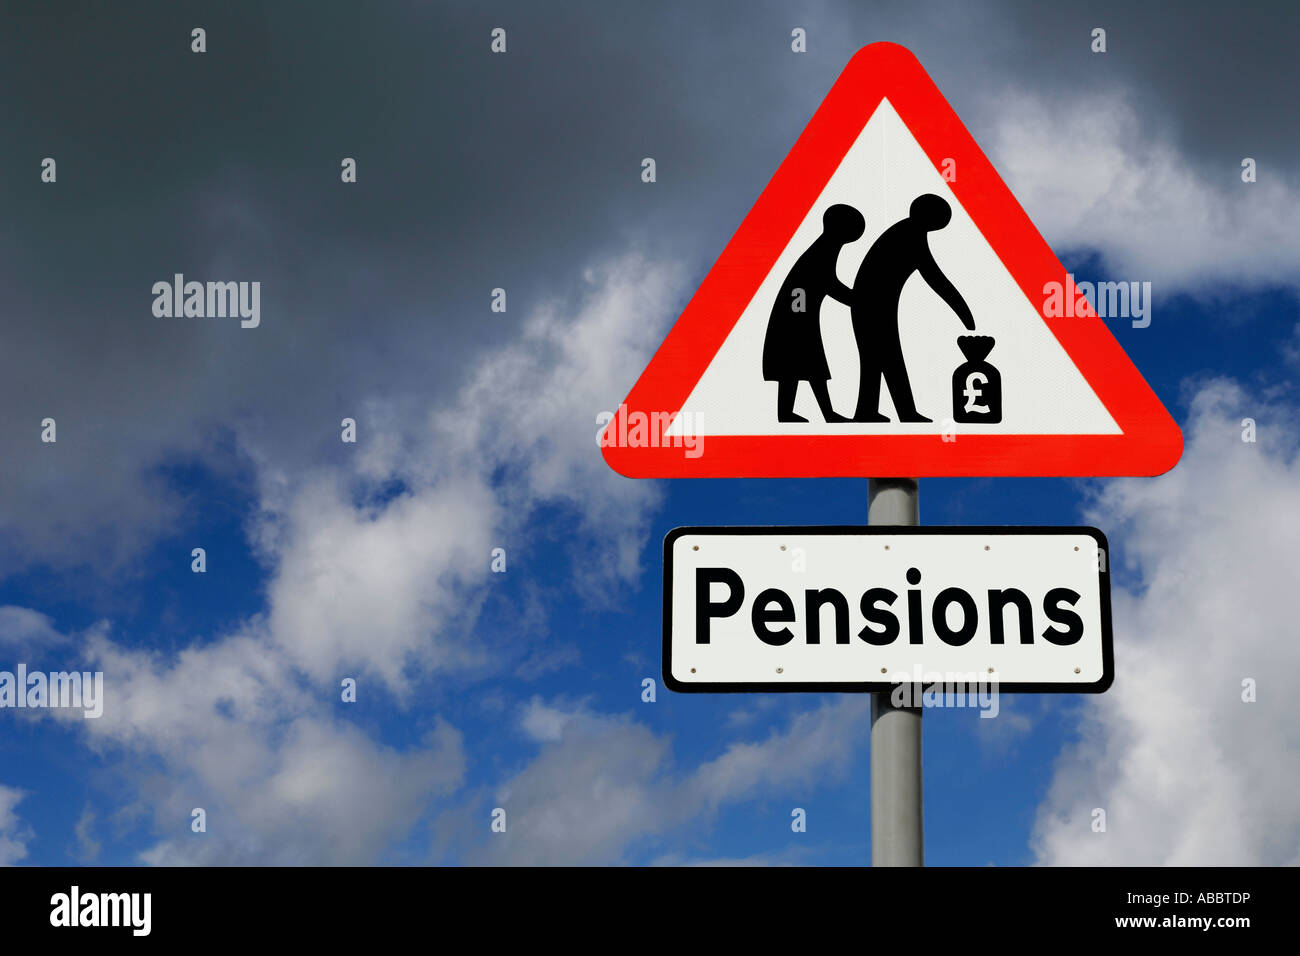 Pensions Road Sign against cloudy sky Stock Photo